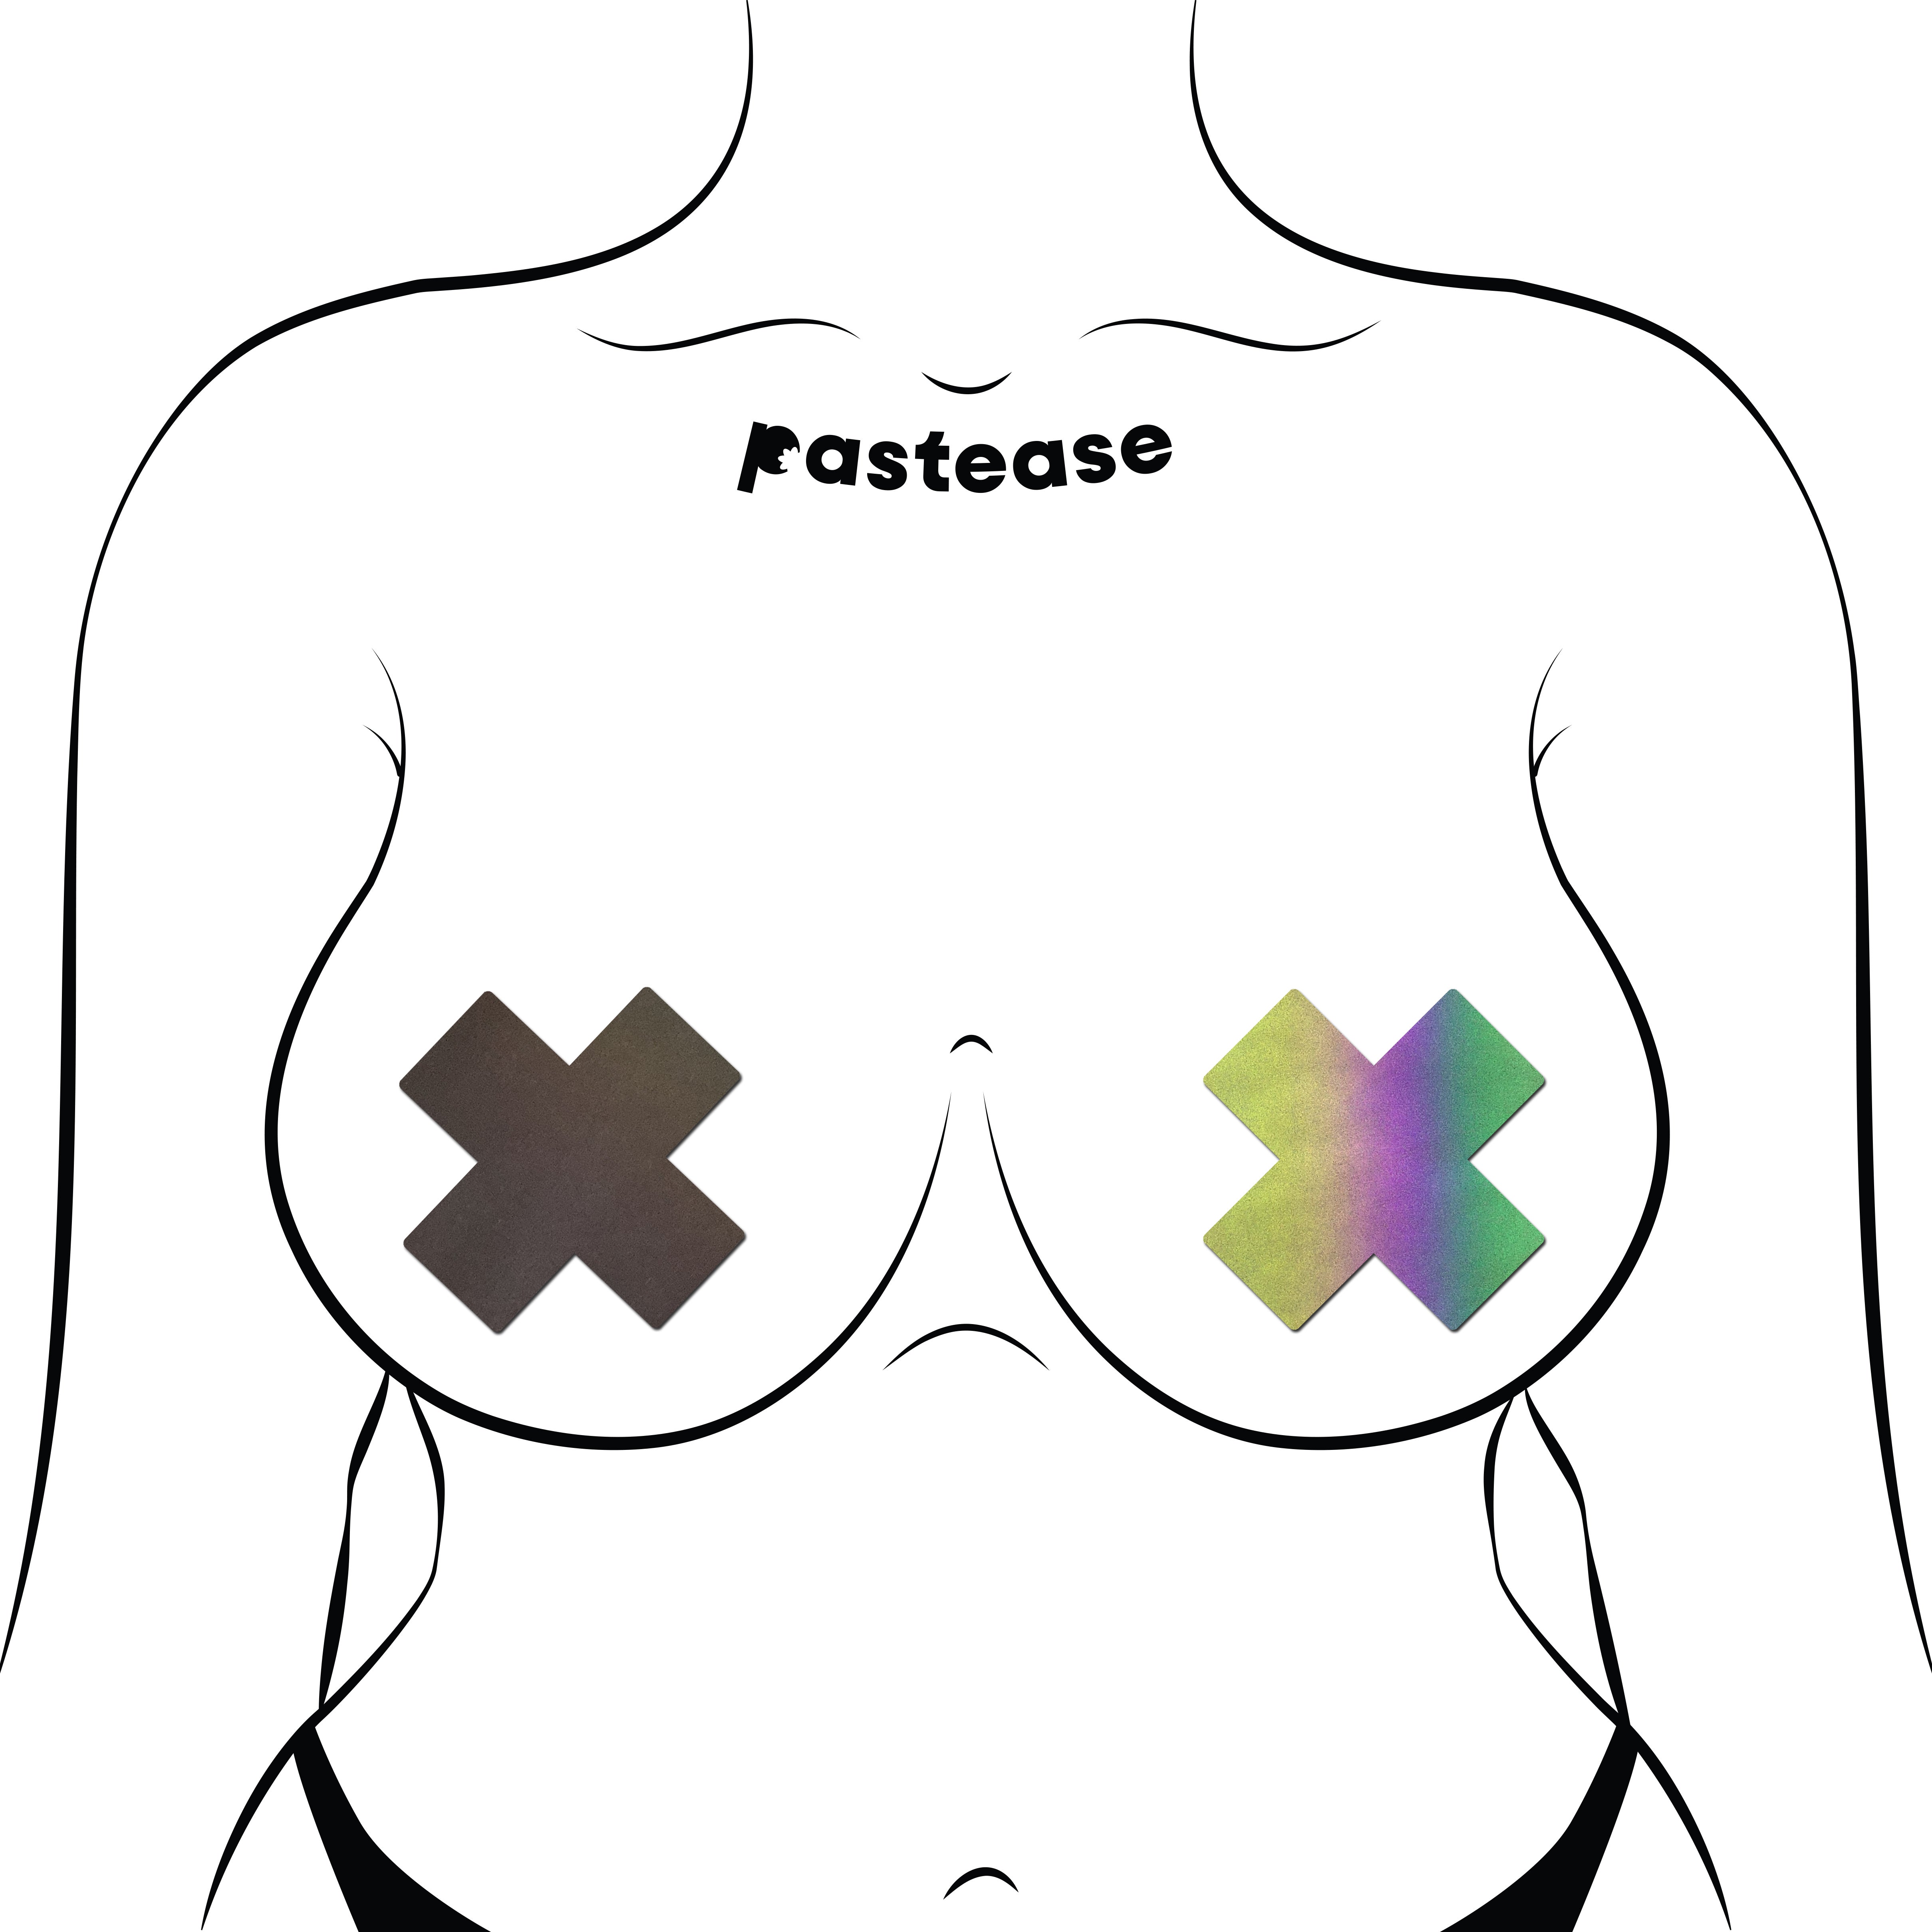 Plus X: Reflective Cross Nipple Pasties by Pastease® o/s